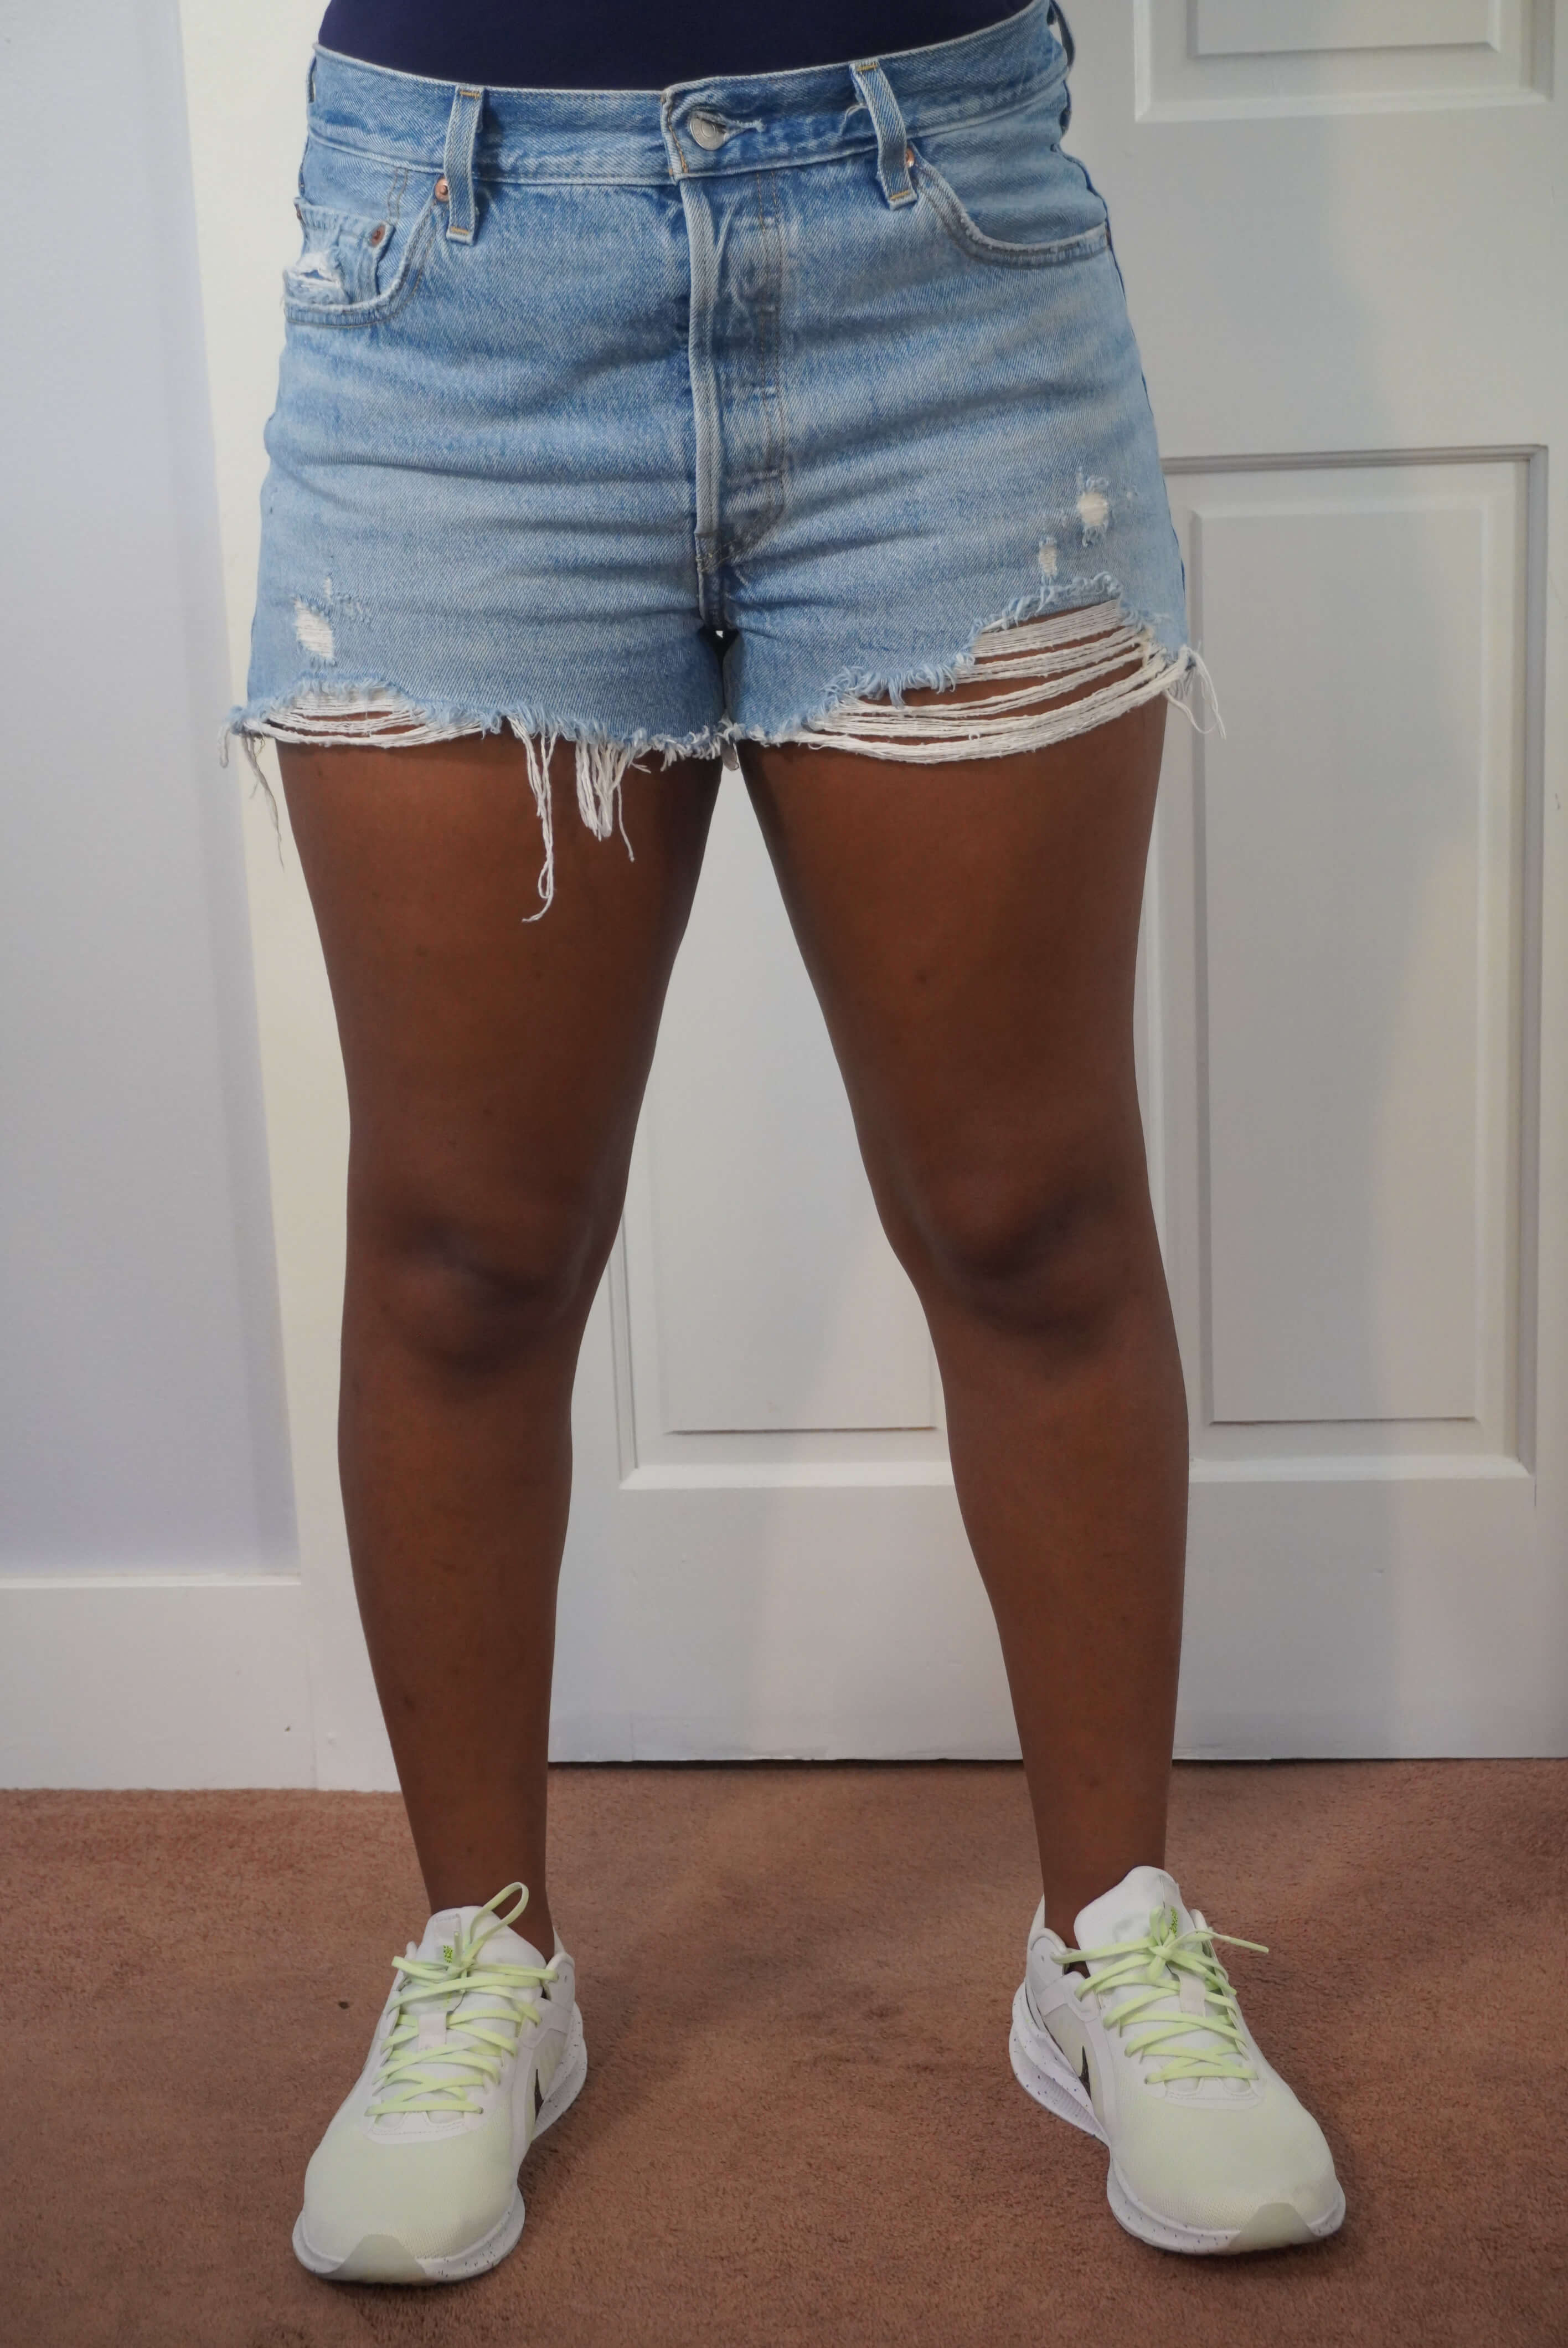 This image shows the front view of a pair of 501 Levi's shorts on the author. These shorts have frayed bottoms and a stone wash look to it.